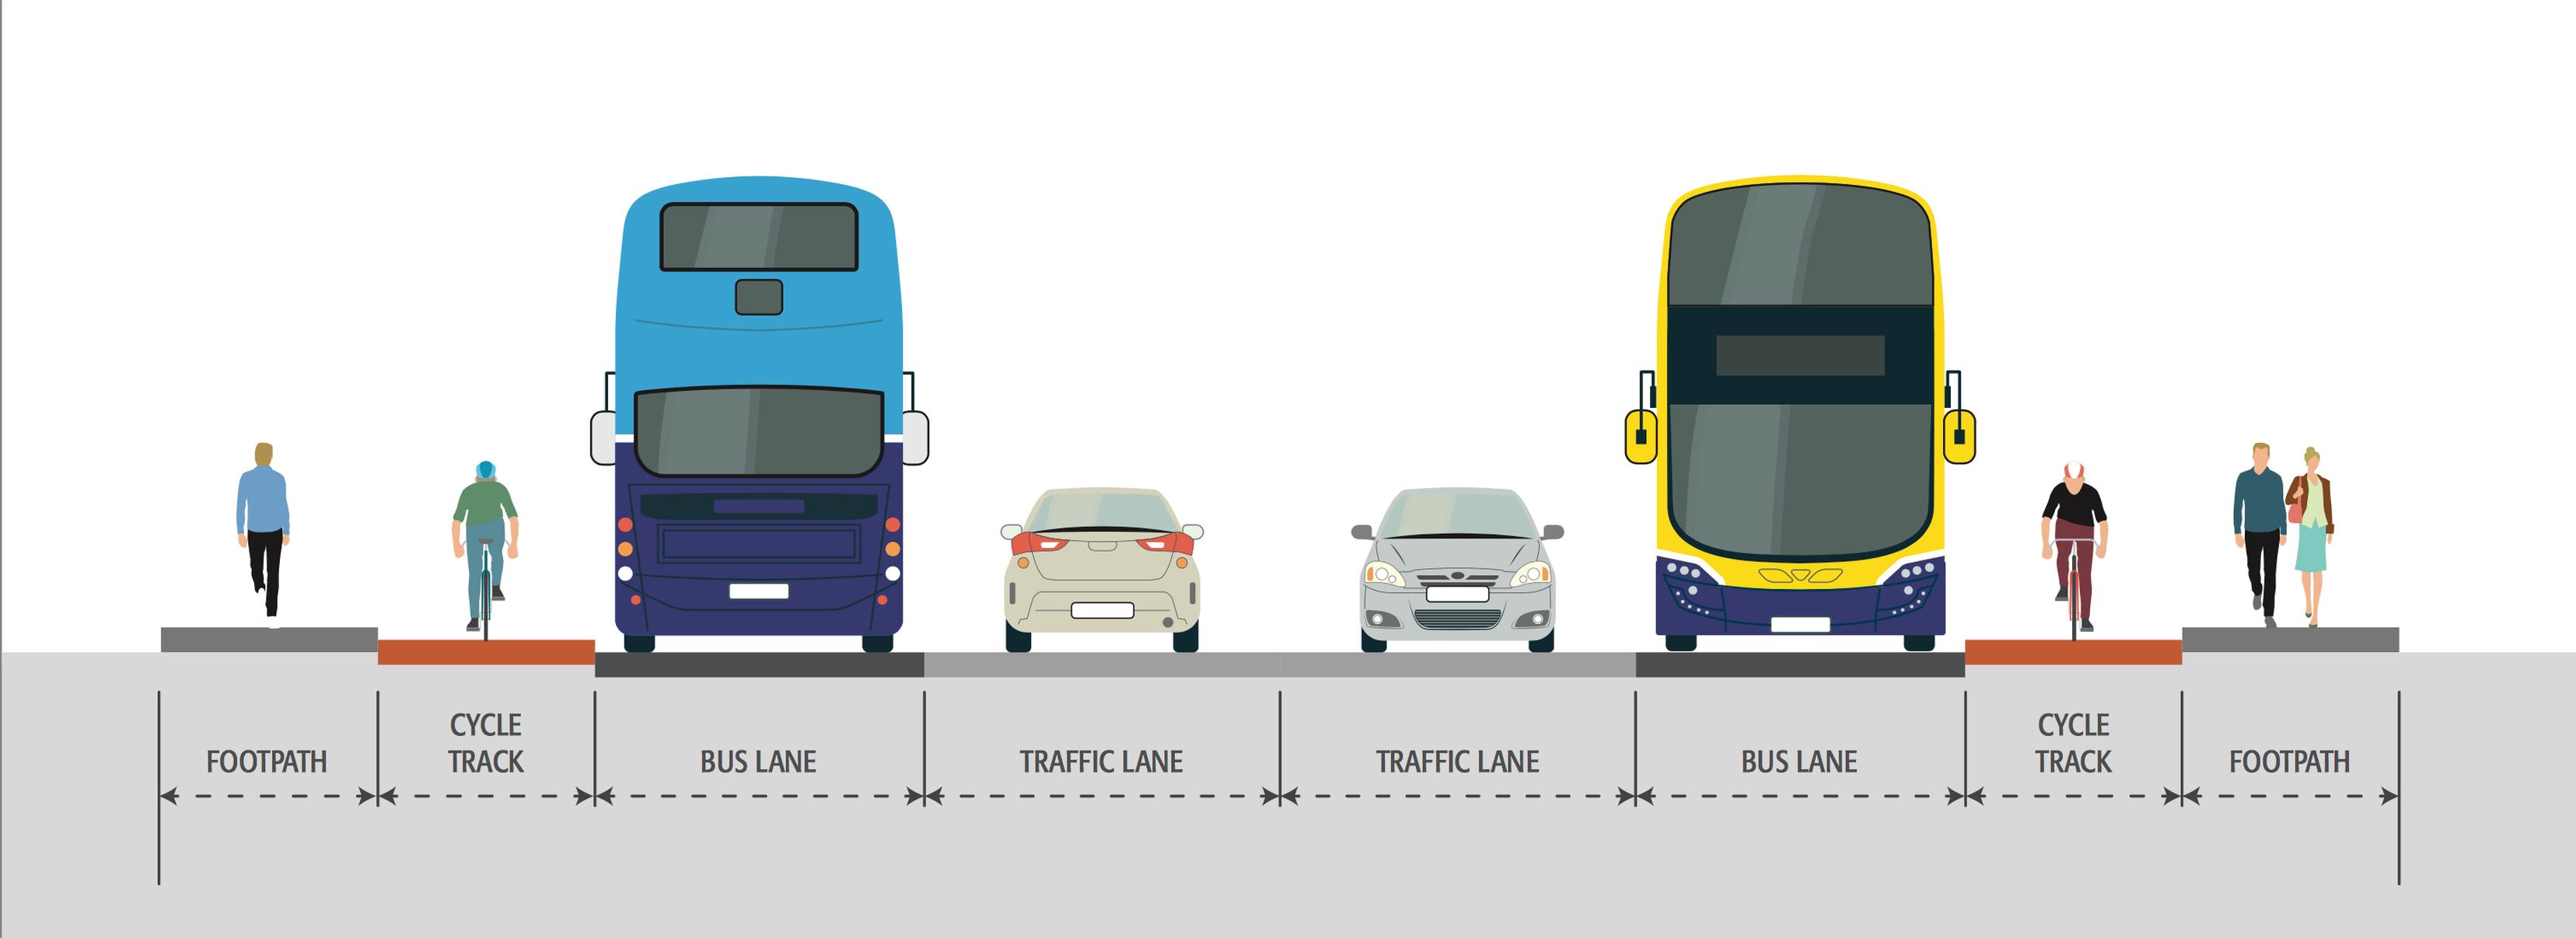 Roads will be widened across Dublin to create spade for new bus and cycle lanes